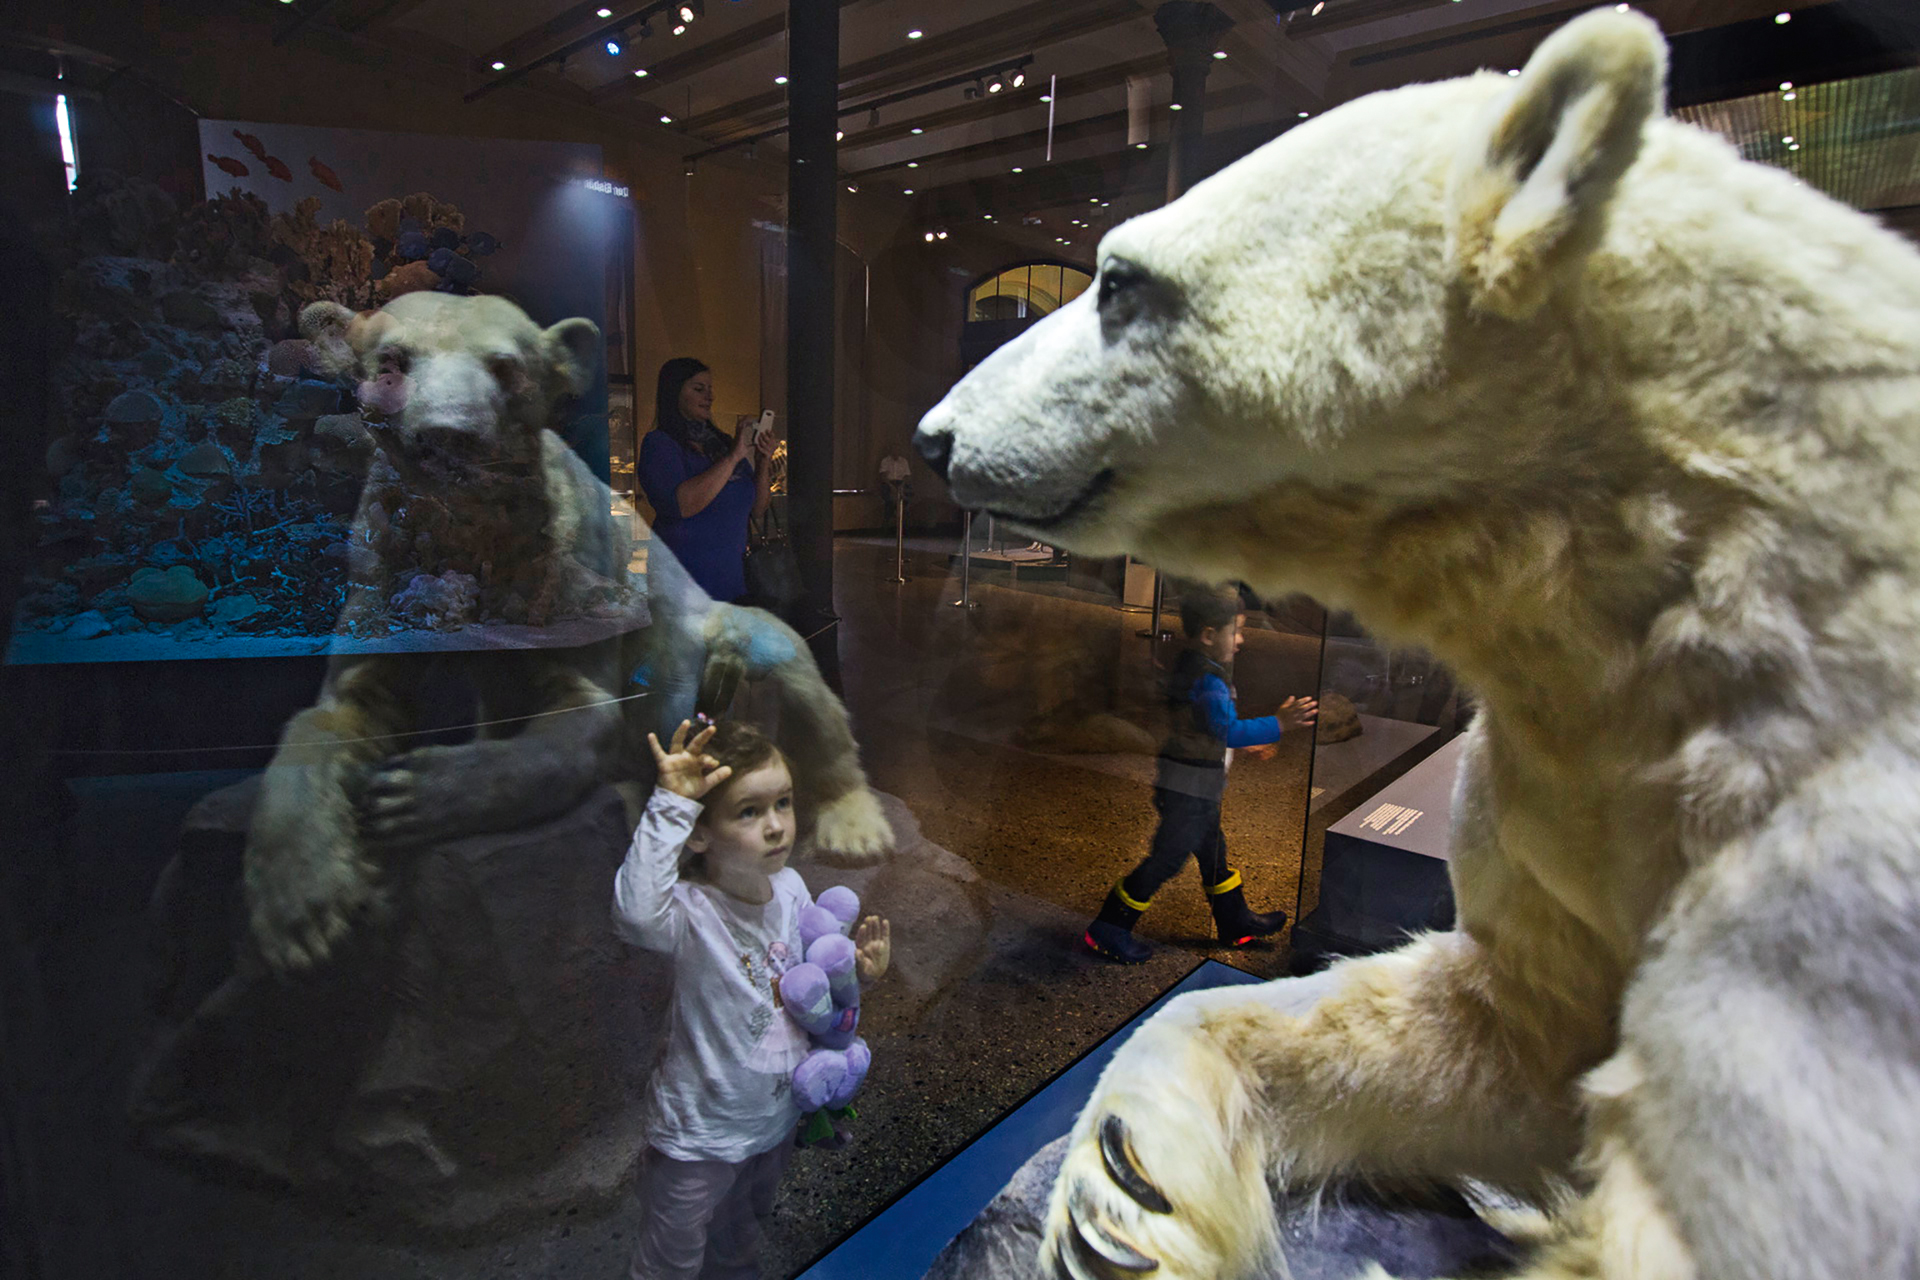  Knut was rejected by his mother at birth and raised by zookeepers. He was the first polar bear cub to survive past infancy at the Berlin Zoo in more than 30 years, and he became a tourist attraction and commercial success worldwide. Knut unexpectedl